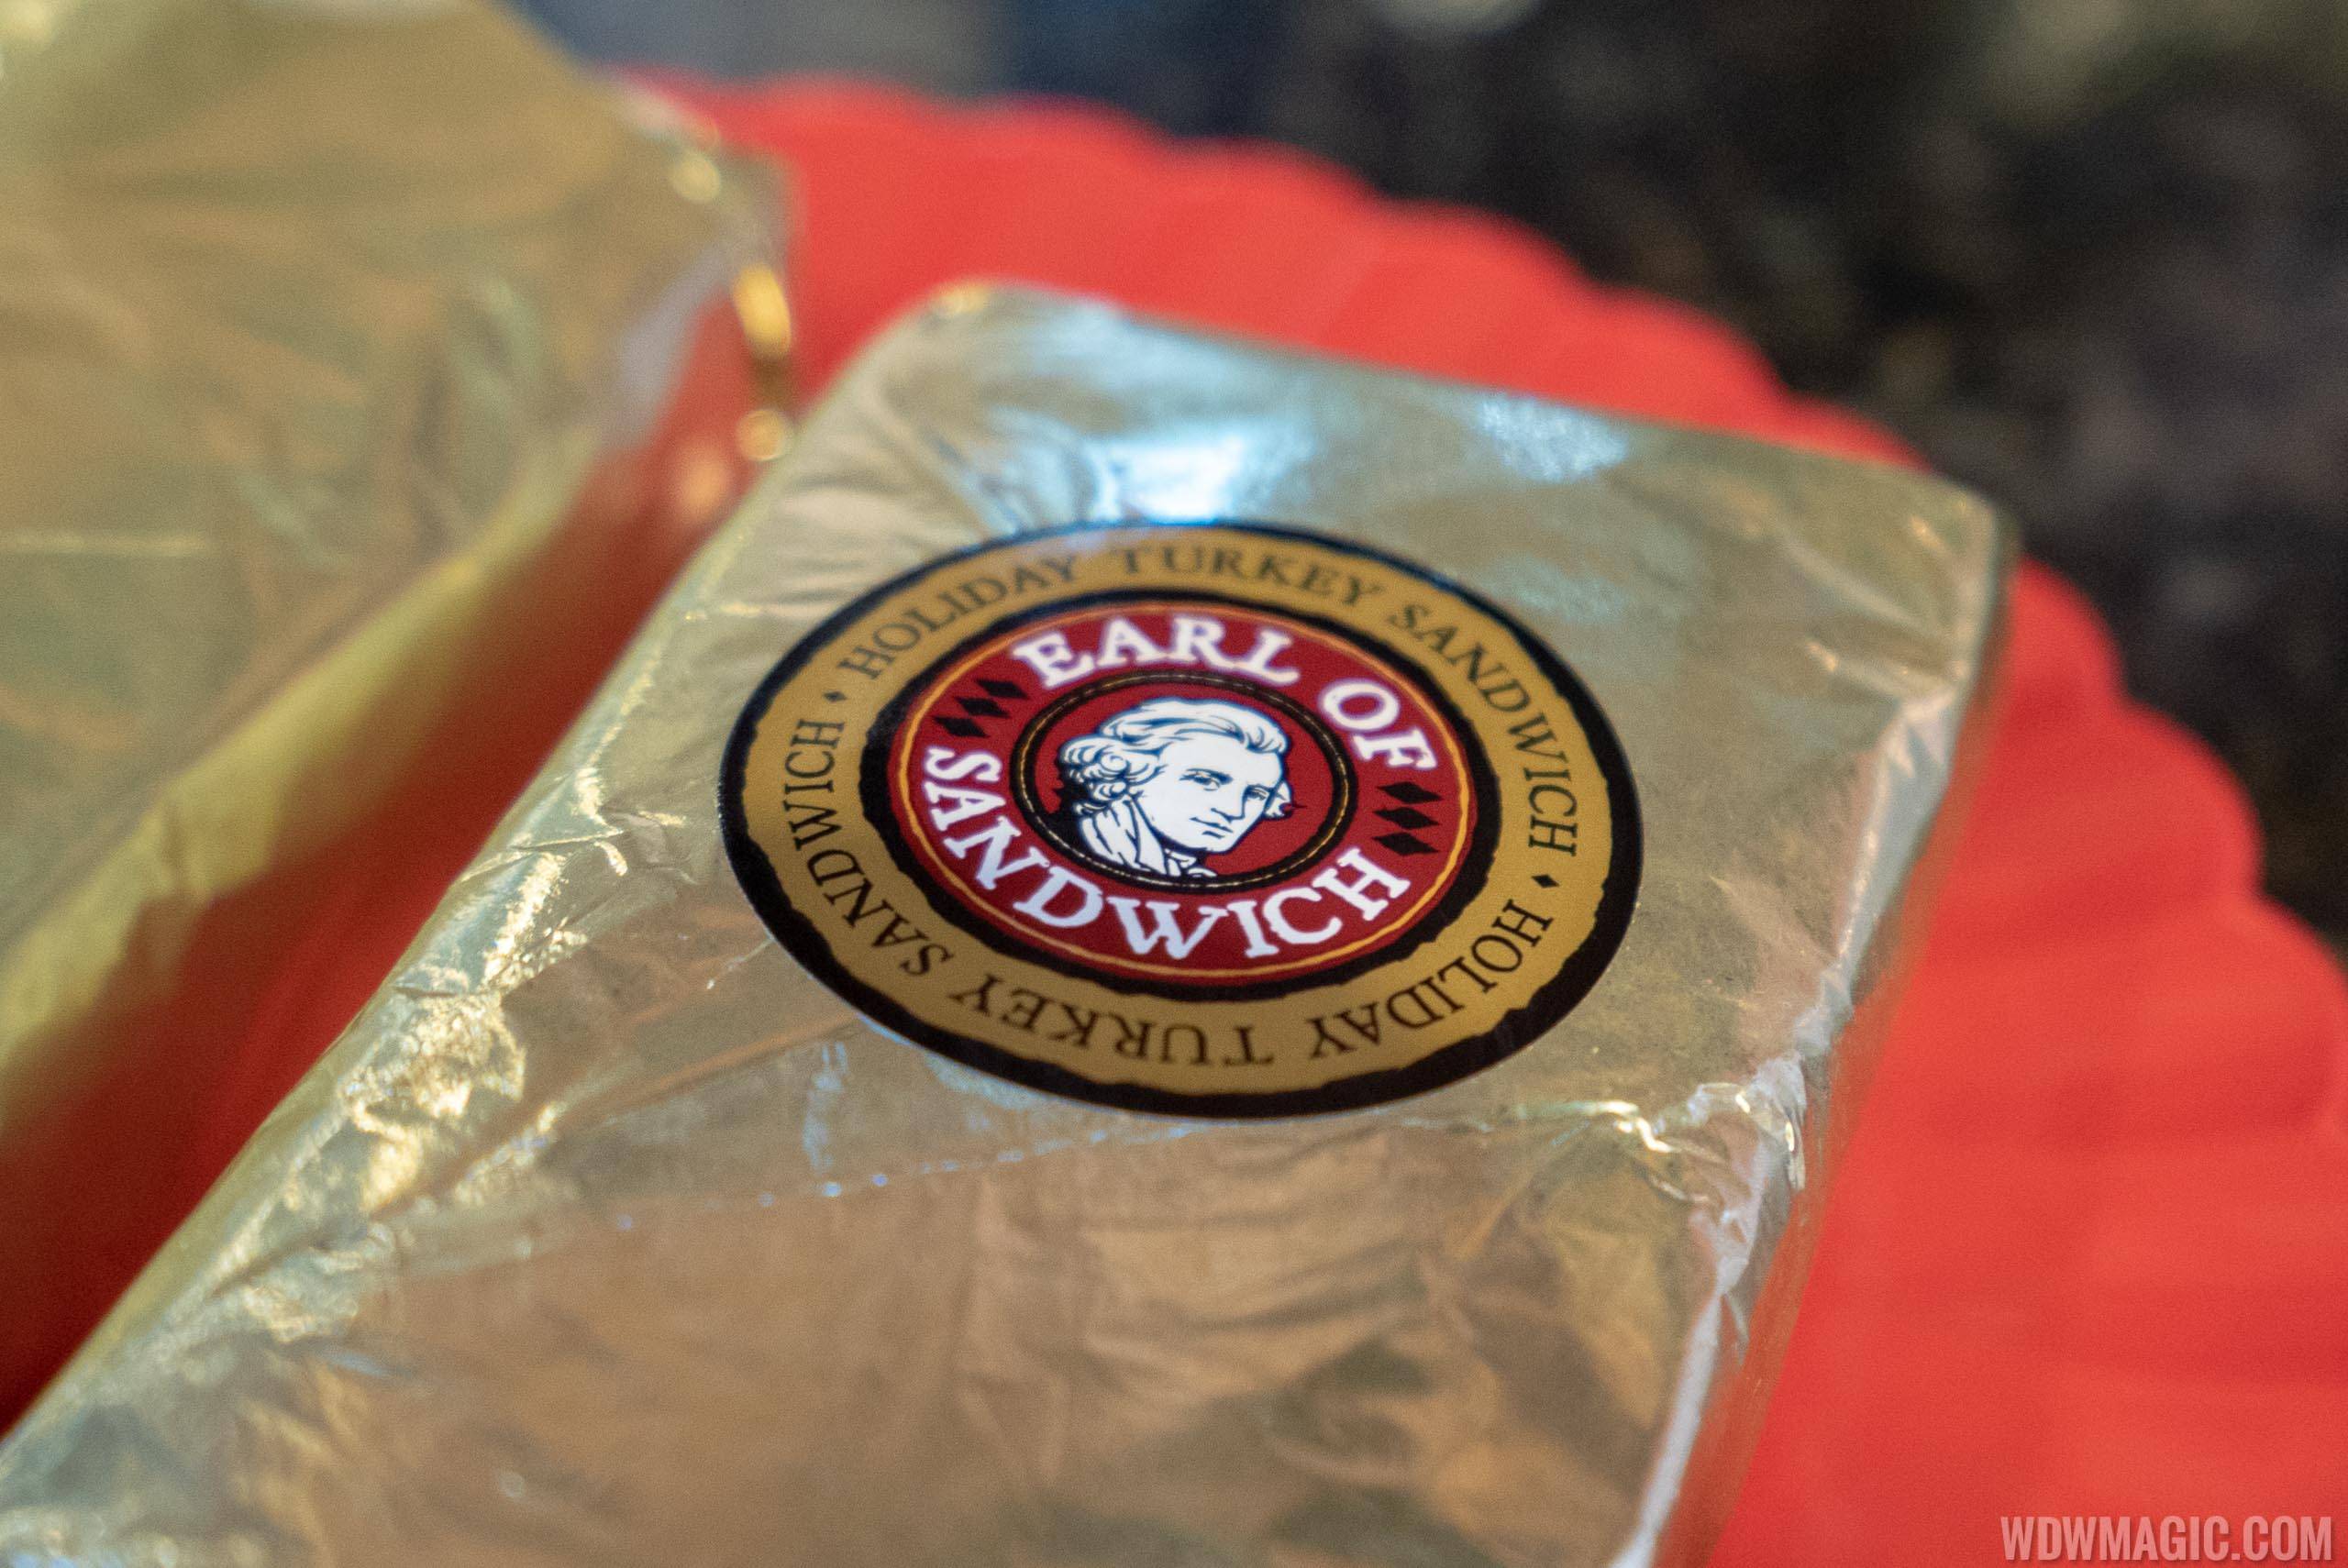 Earl of Sandwich limited time holiday offerings 2018